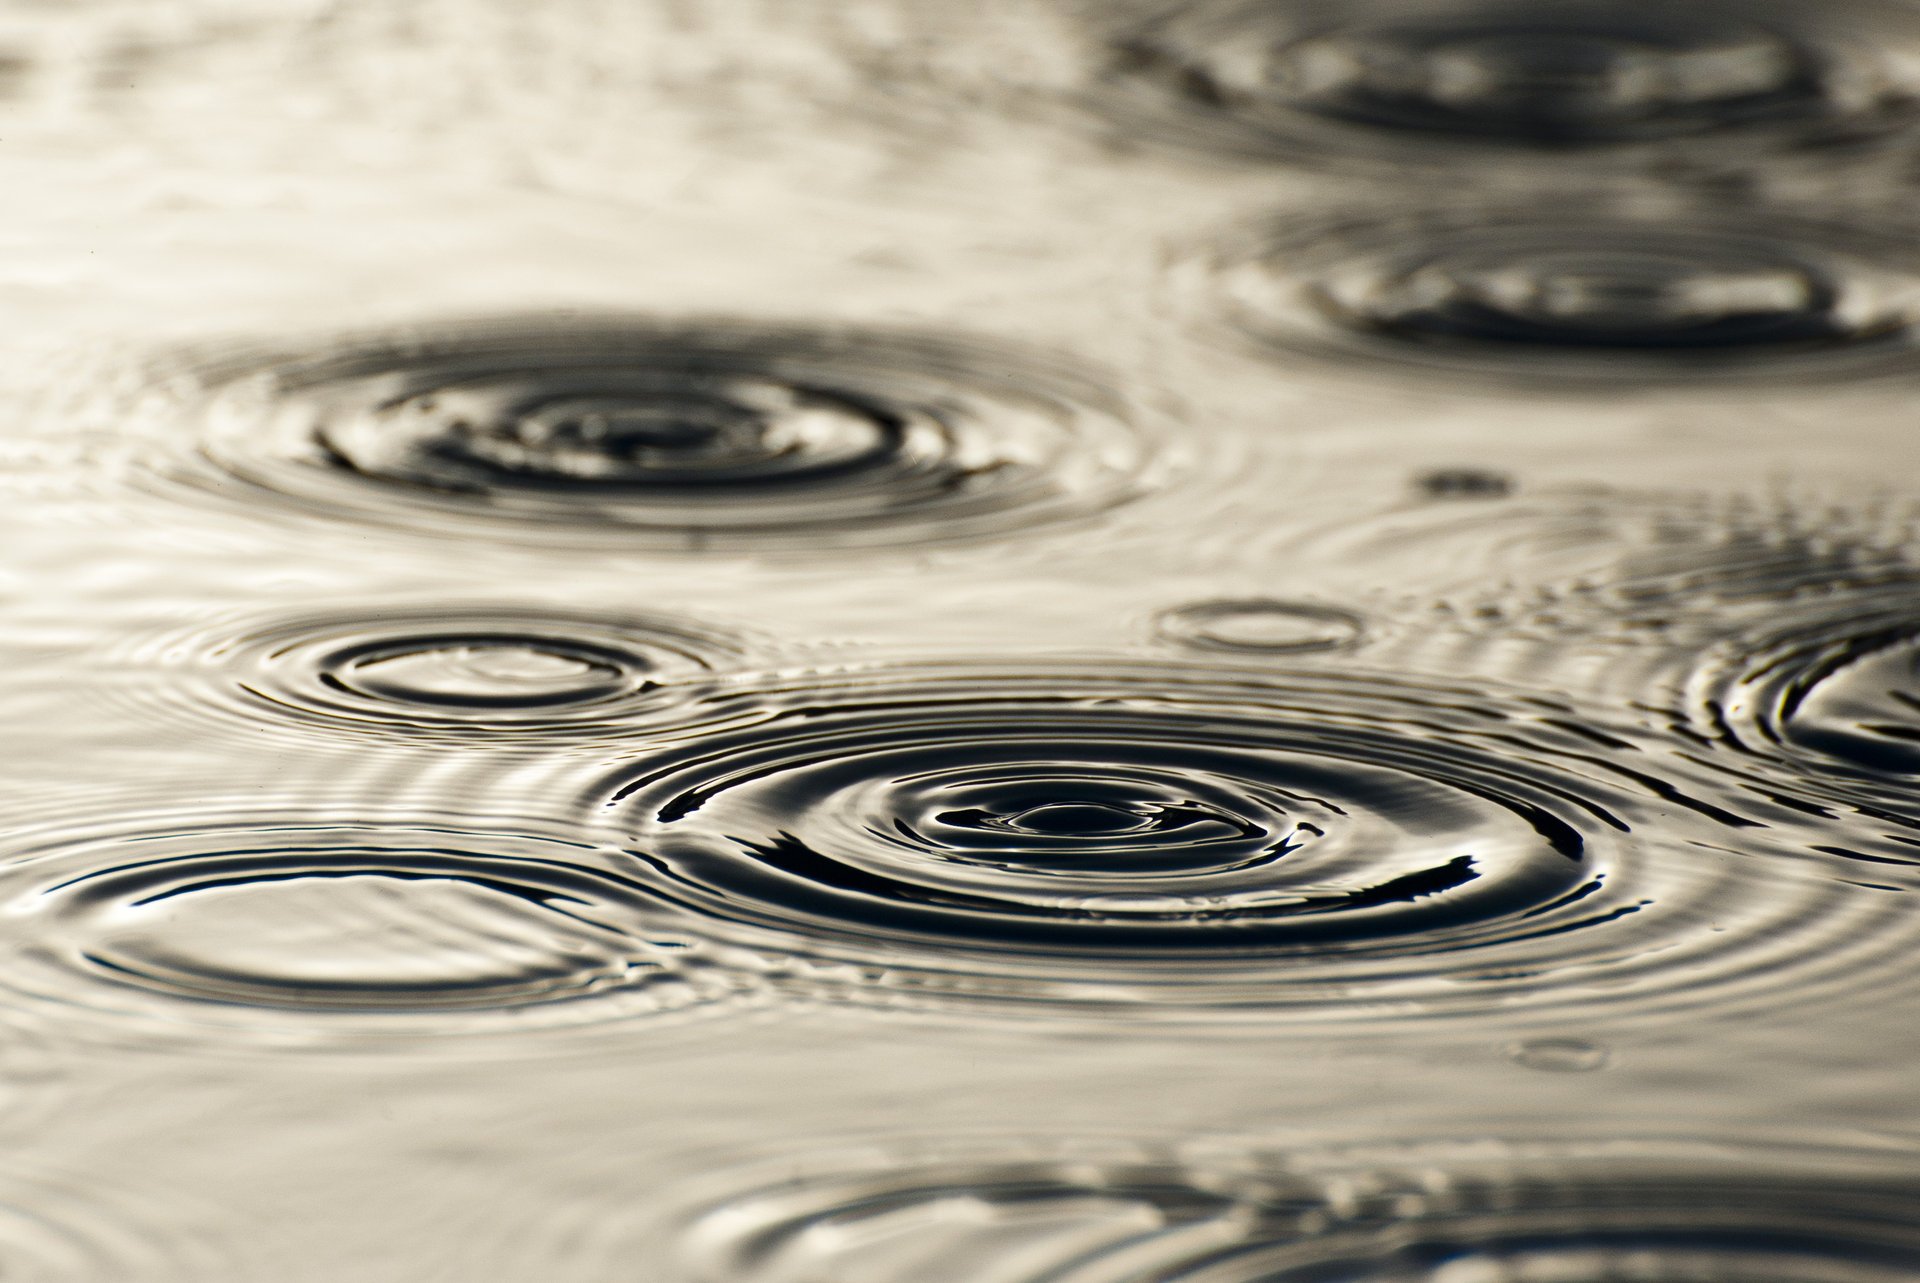 Circles from drops on the water during the rain